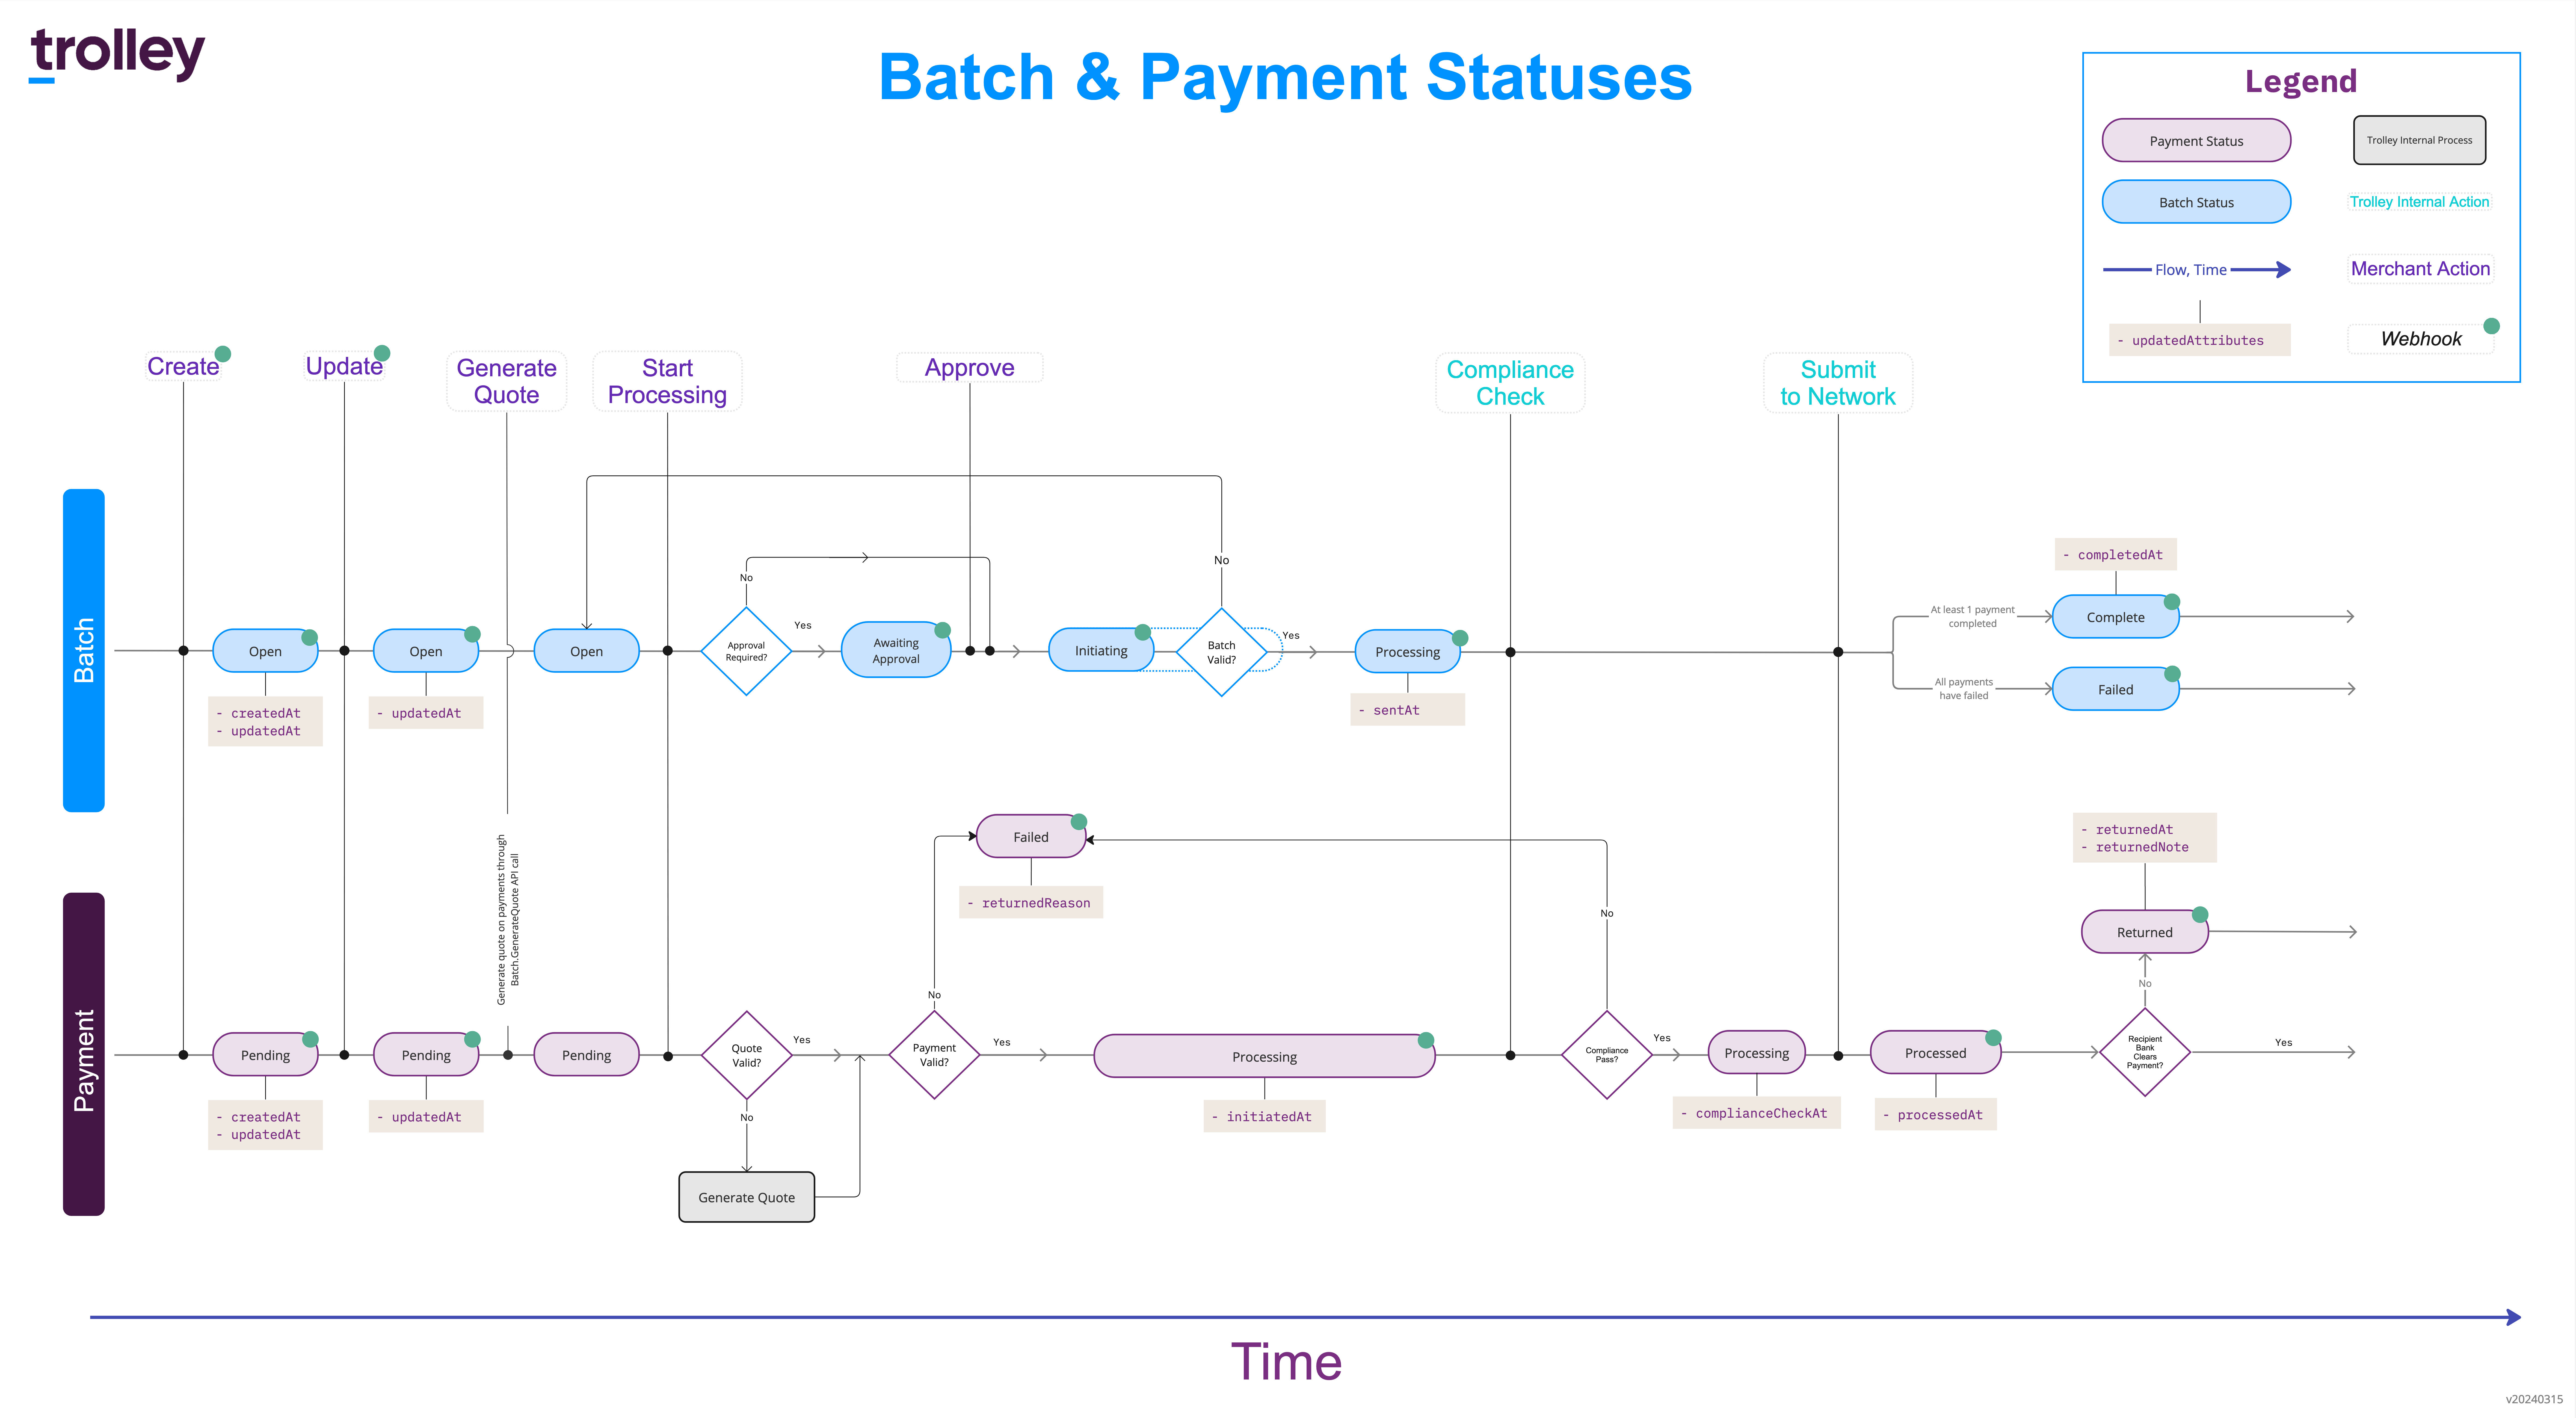 (Trolley Payment and Batch statuses. Click to enlarge)